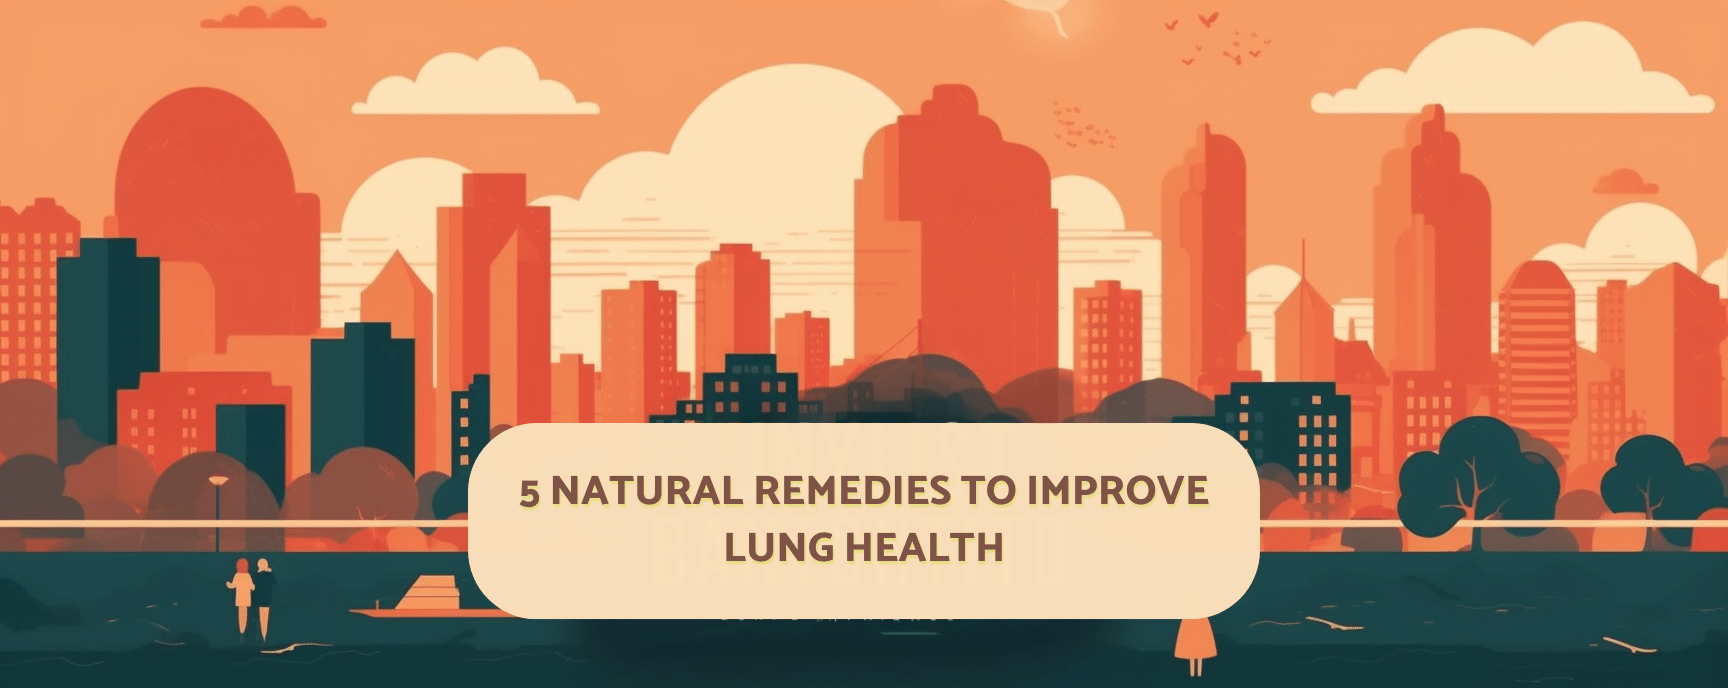 5 Natural Remedies to Improve Lung Health